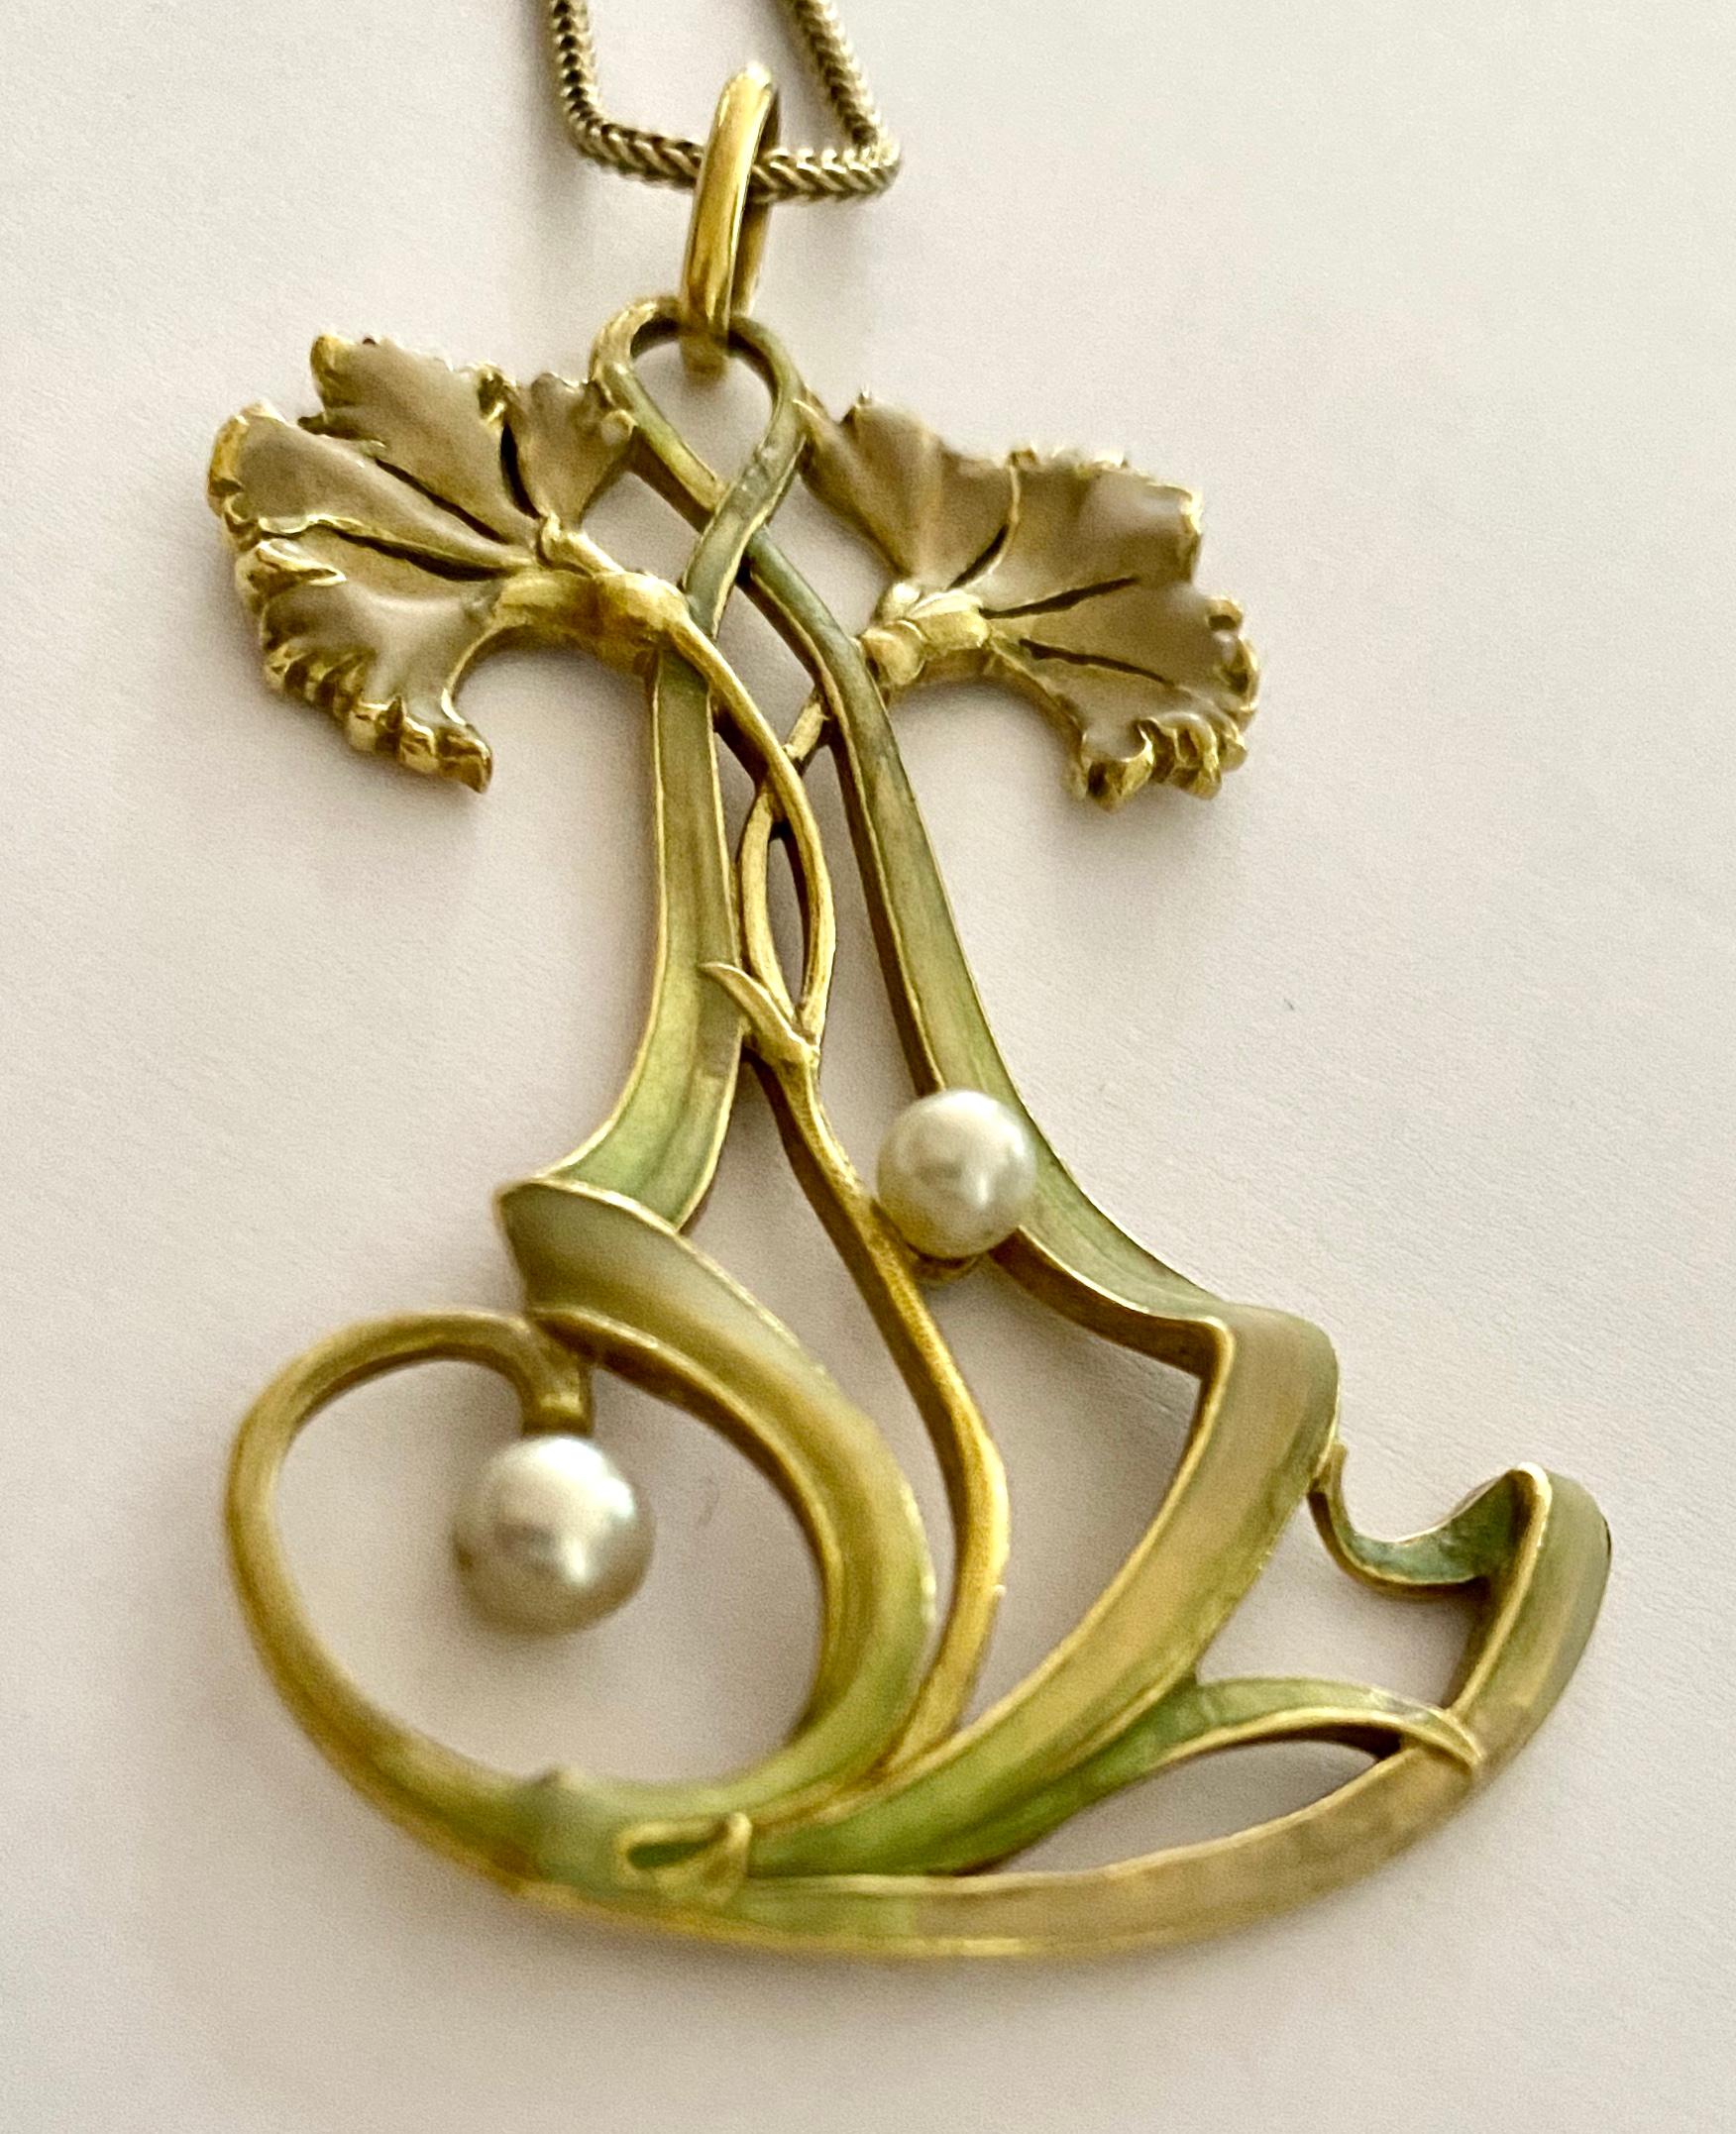 An 18K. Yellow gold pendant, Art Nouveau, attributed to Henry Vever,  see The Belle Epoque of French Jewelery 1850-1910, Thomas Heneage & Co Lim. London 1990 page: 207
Paris 1900.
weight: 15.58 grams. 2 saltwater pearls of approximately 4 mm